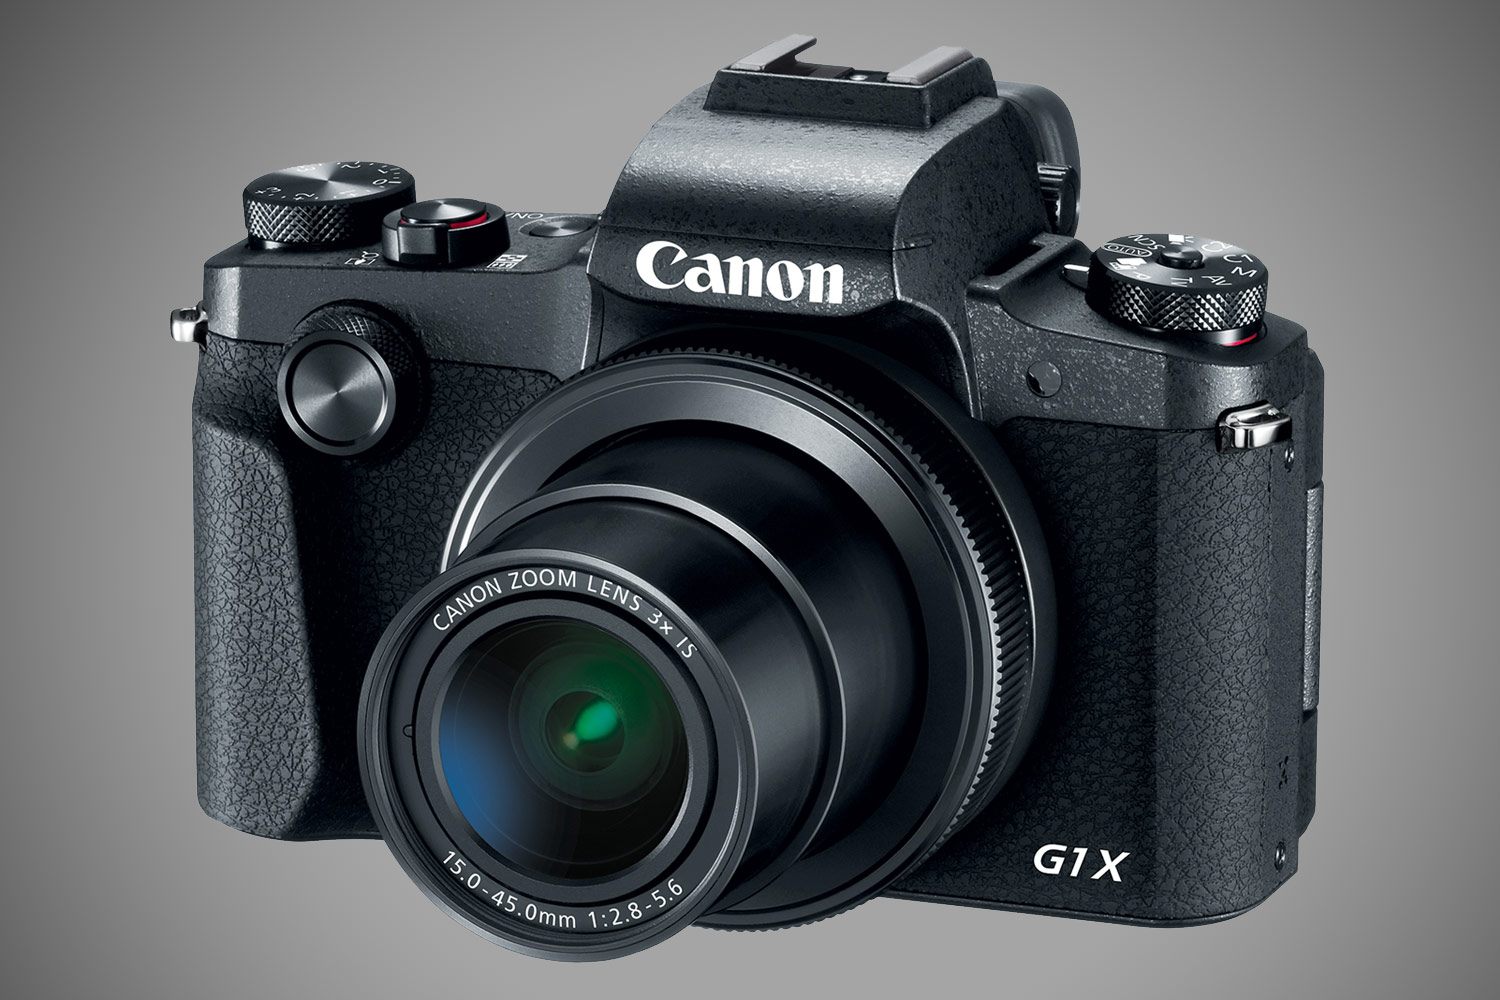 Canon Updates Advanced Compact Flagship with G1 X Mark III | Digital Trends